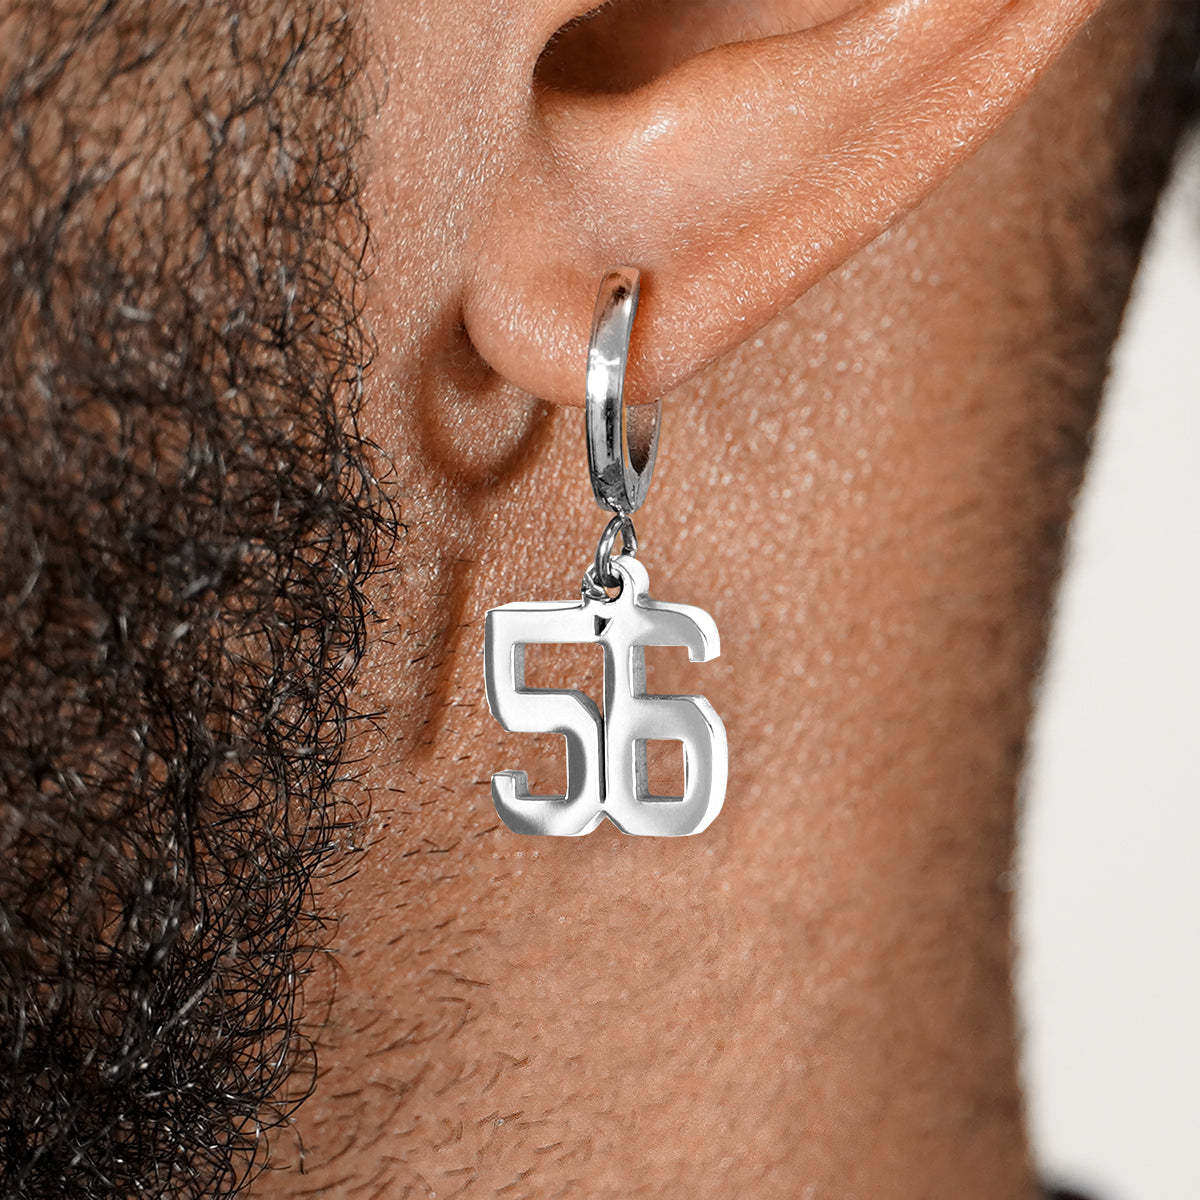 56 Number Earring - Stainless Steel